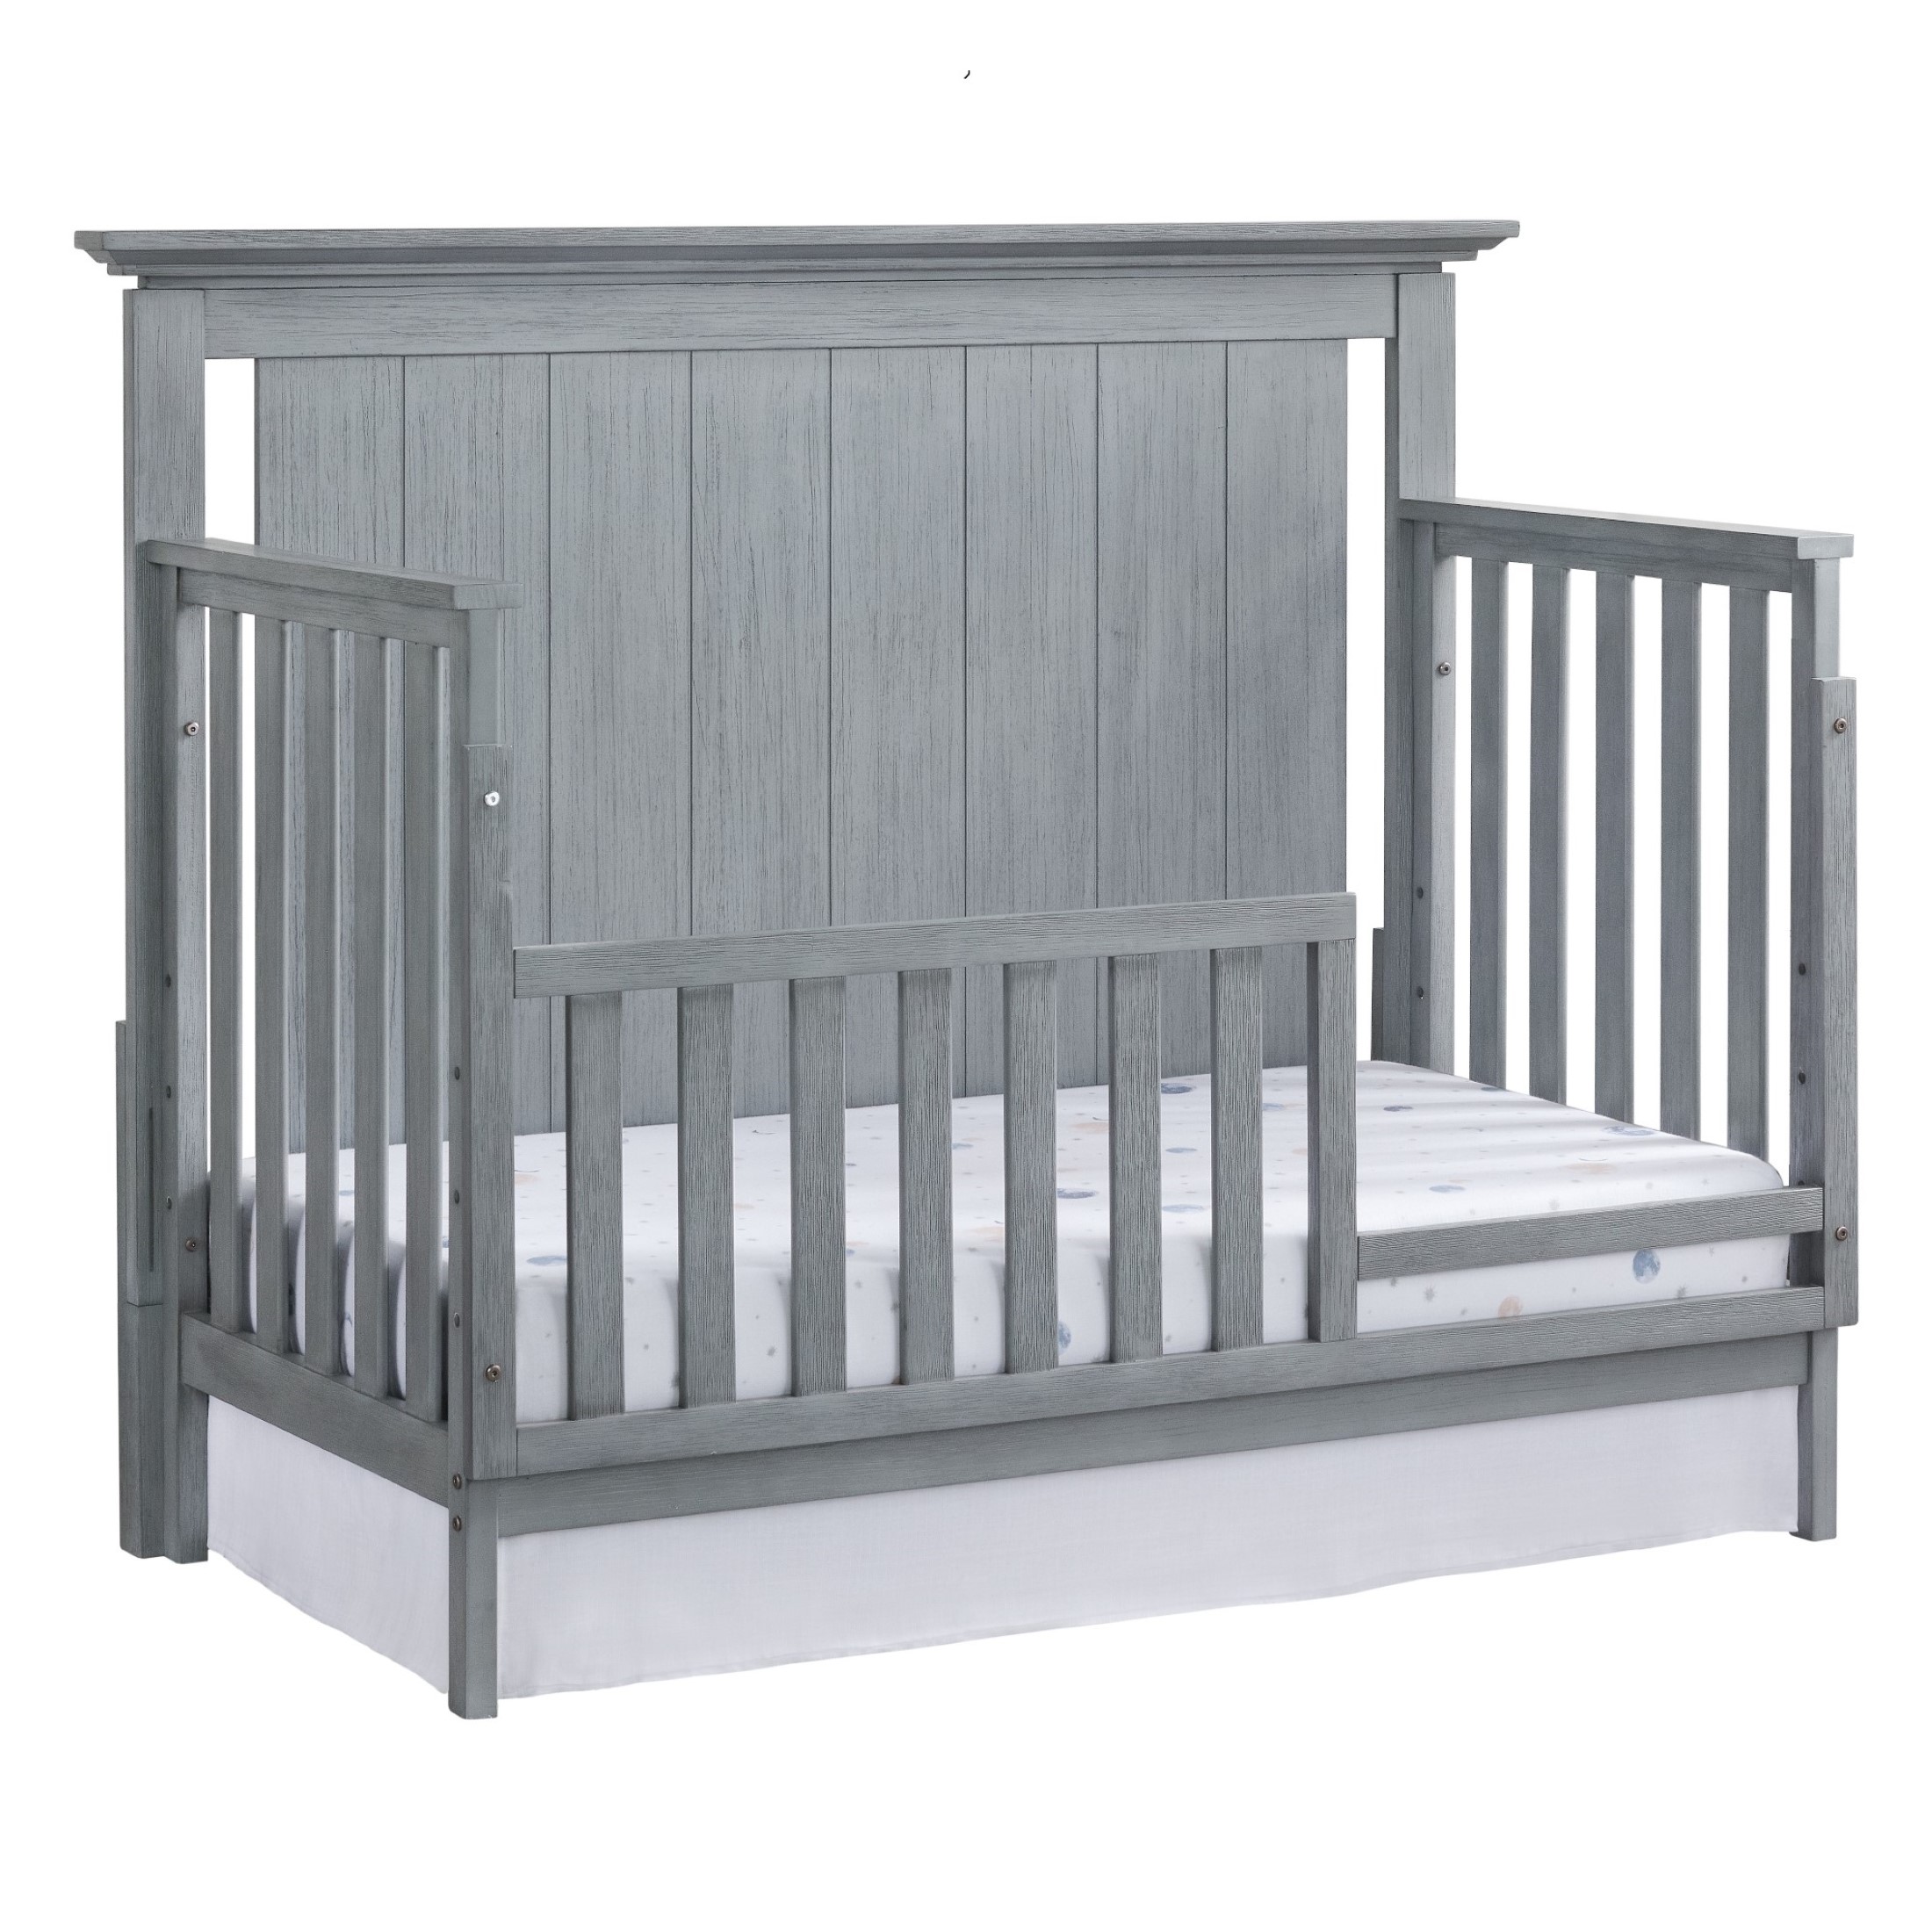 Oxford Baby Langston 4-in-1 Convertible Crib, Graphite Gray, Wooden Crib - image 5 of 11